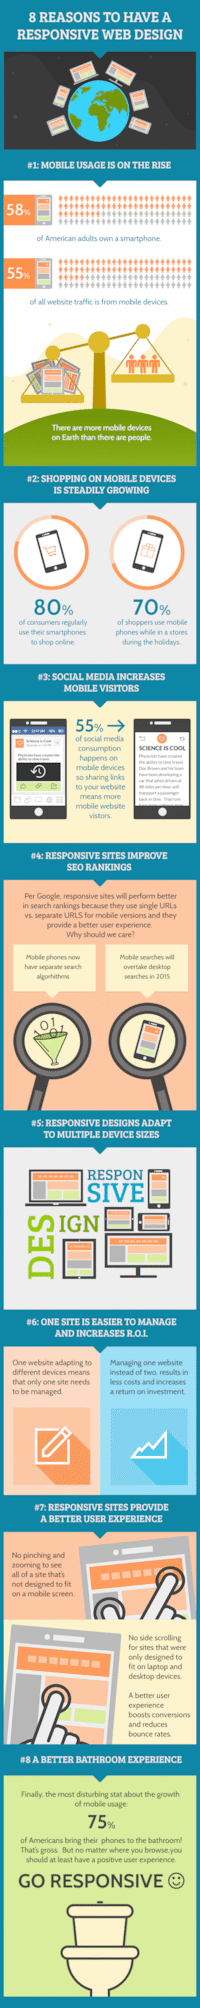 8 Reasons to Have a Mobile Responsive Web Design Infographic